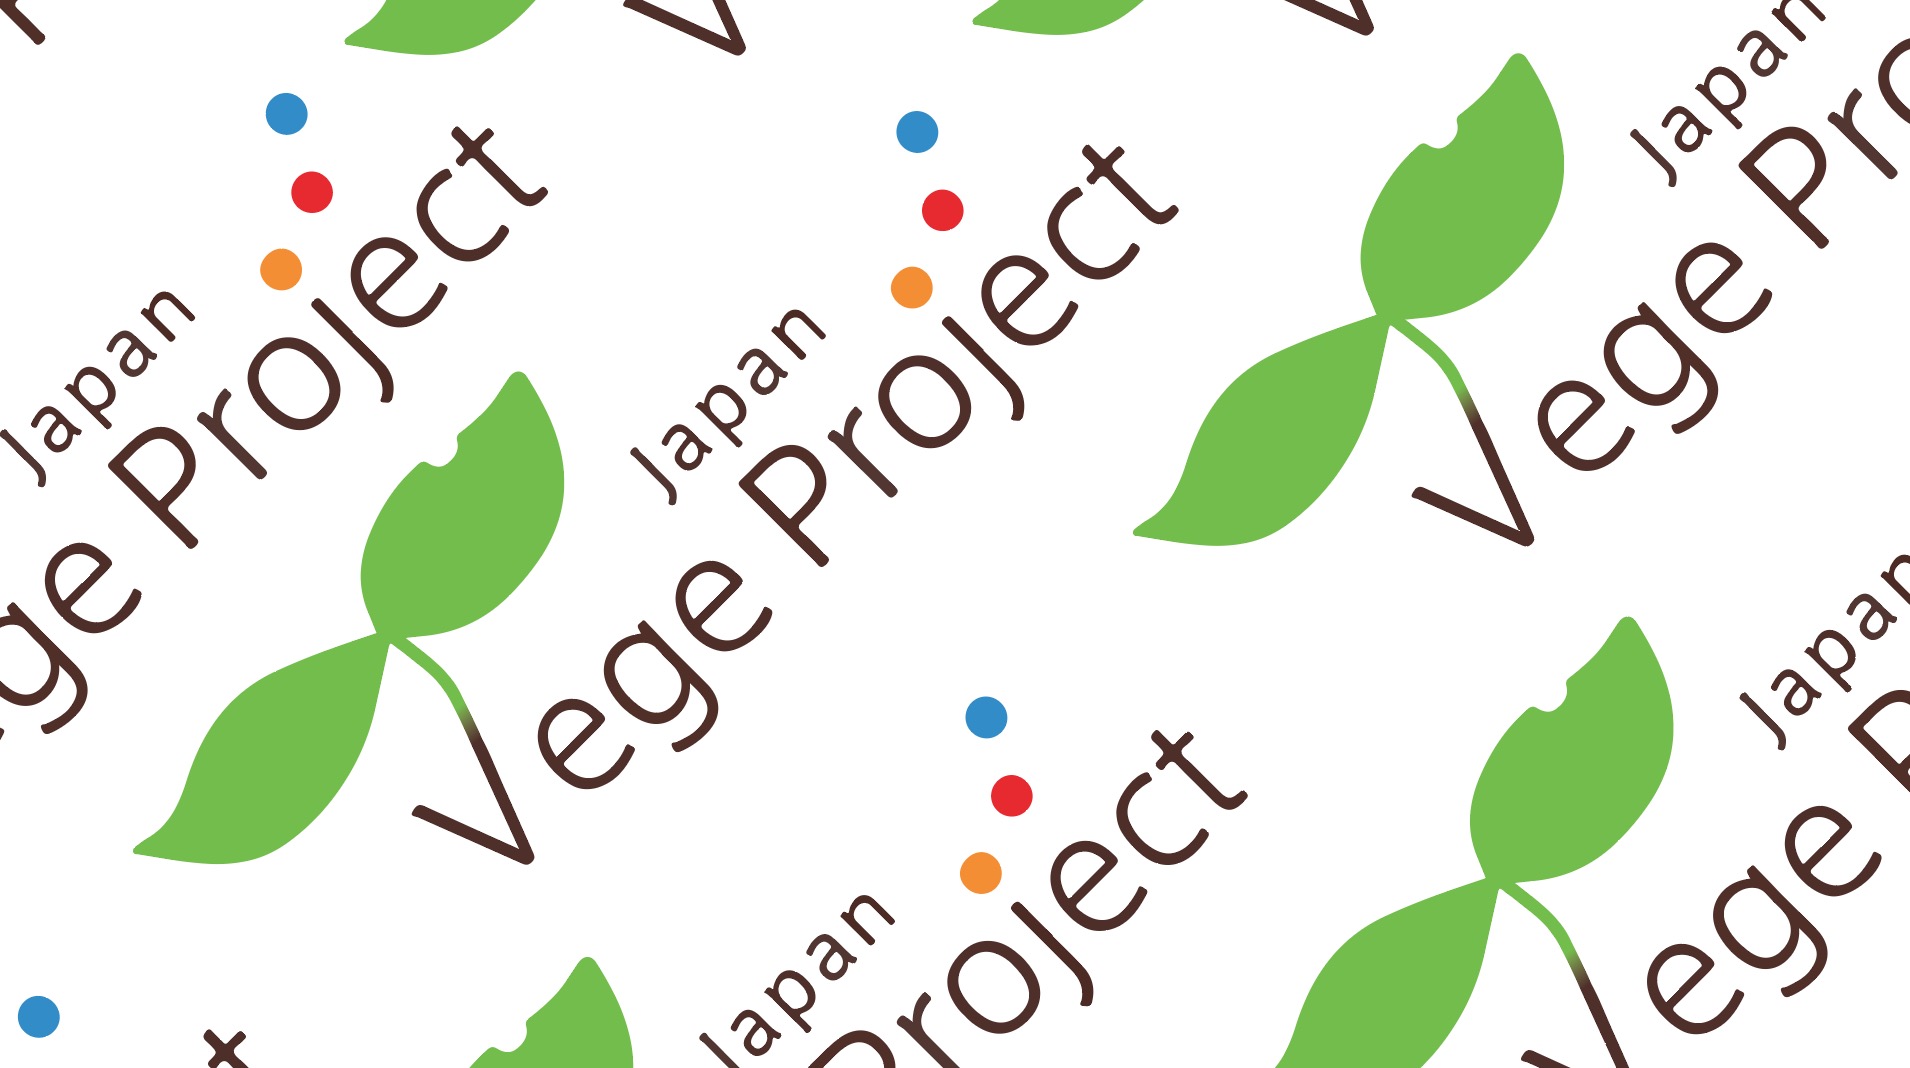 neoyume vegeproject cover